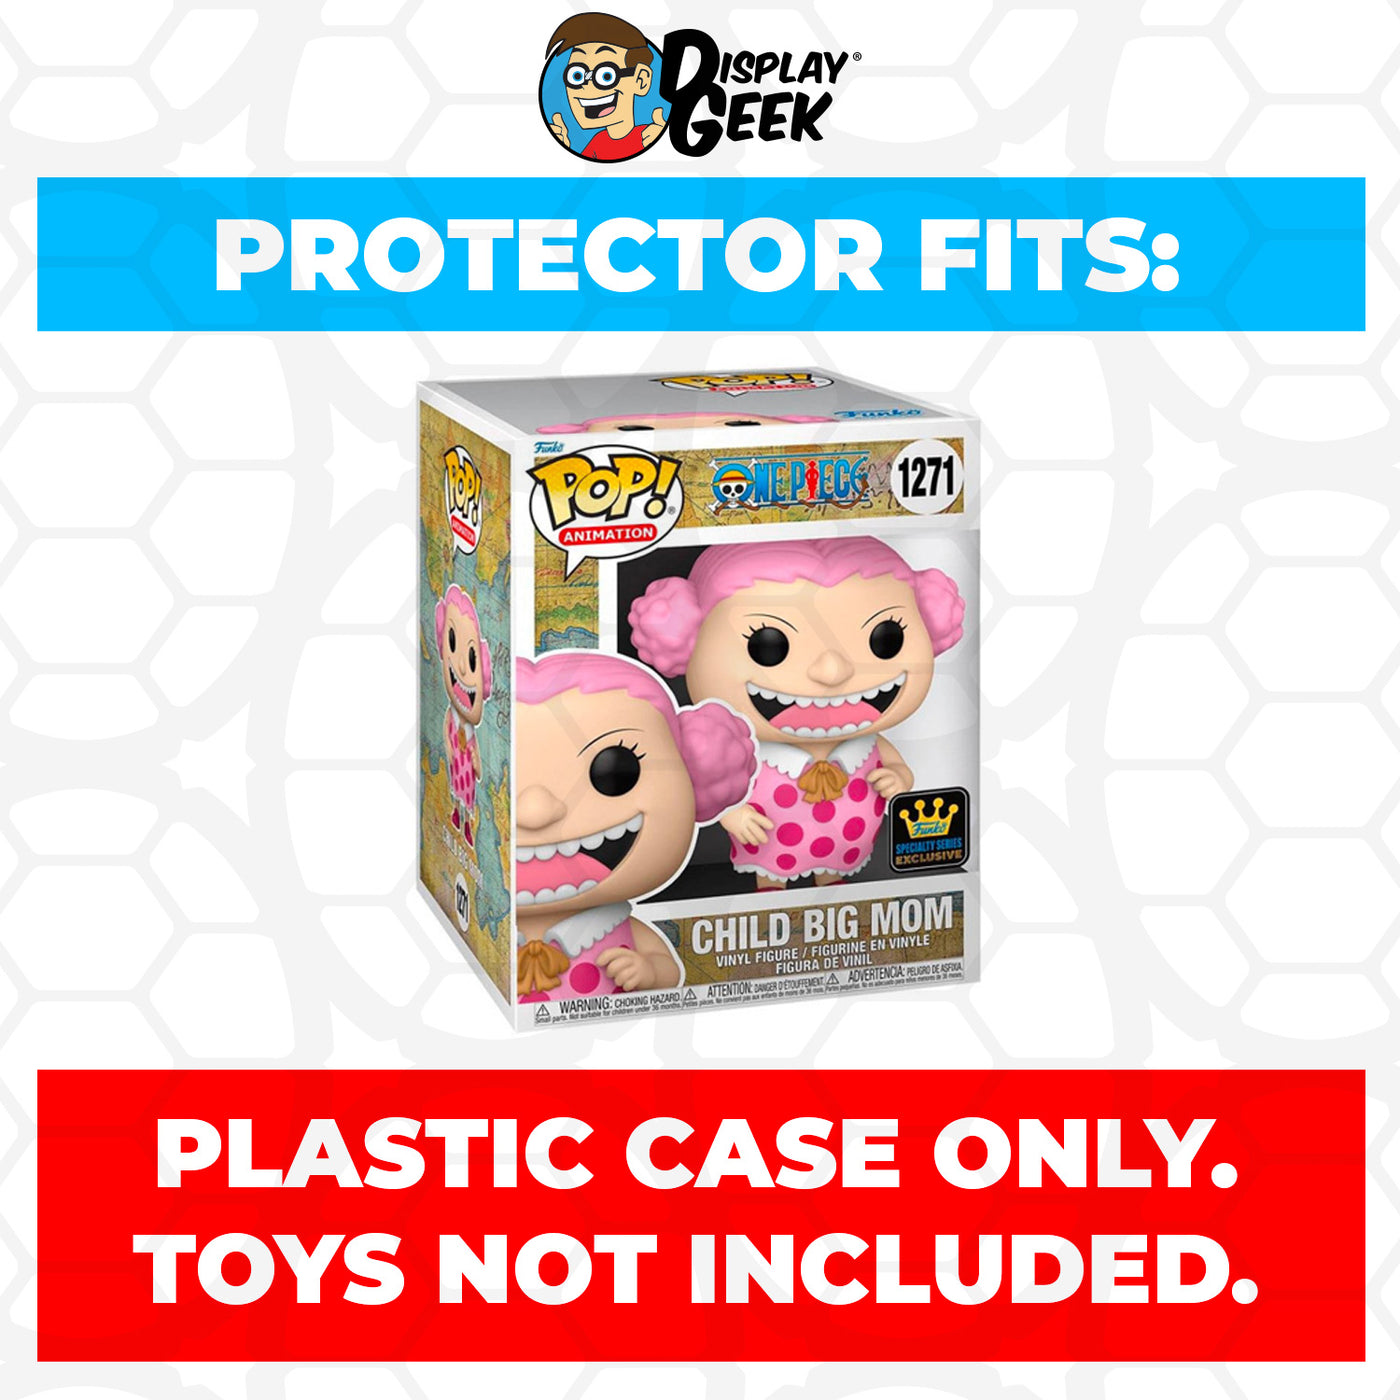 Pop Protector for 6 inch One Piece Child Big Mom #1271 Super Funko Pop on The Protector Guide App by Display Geek